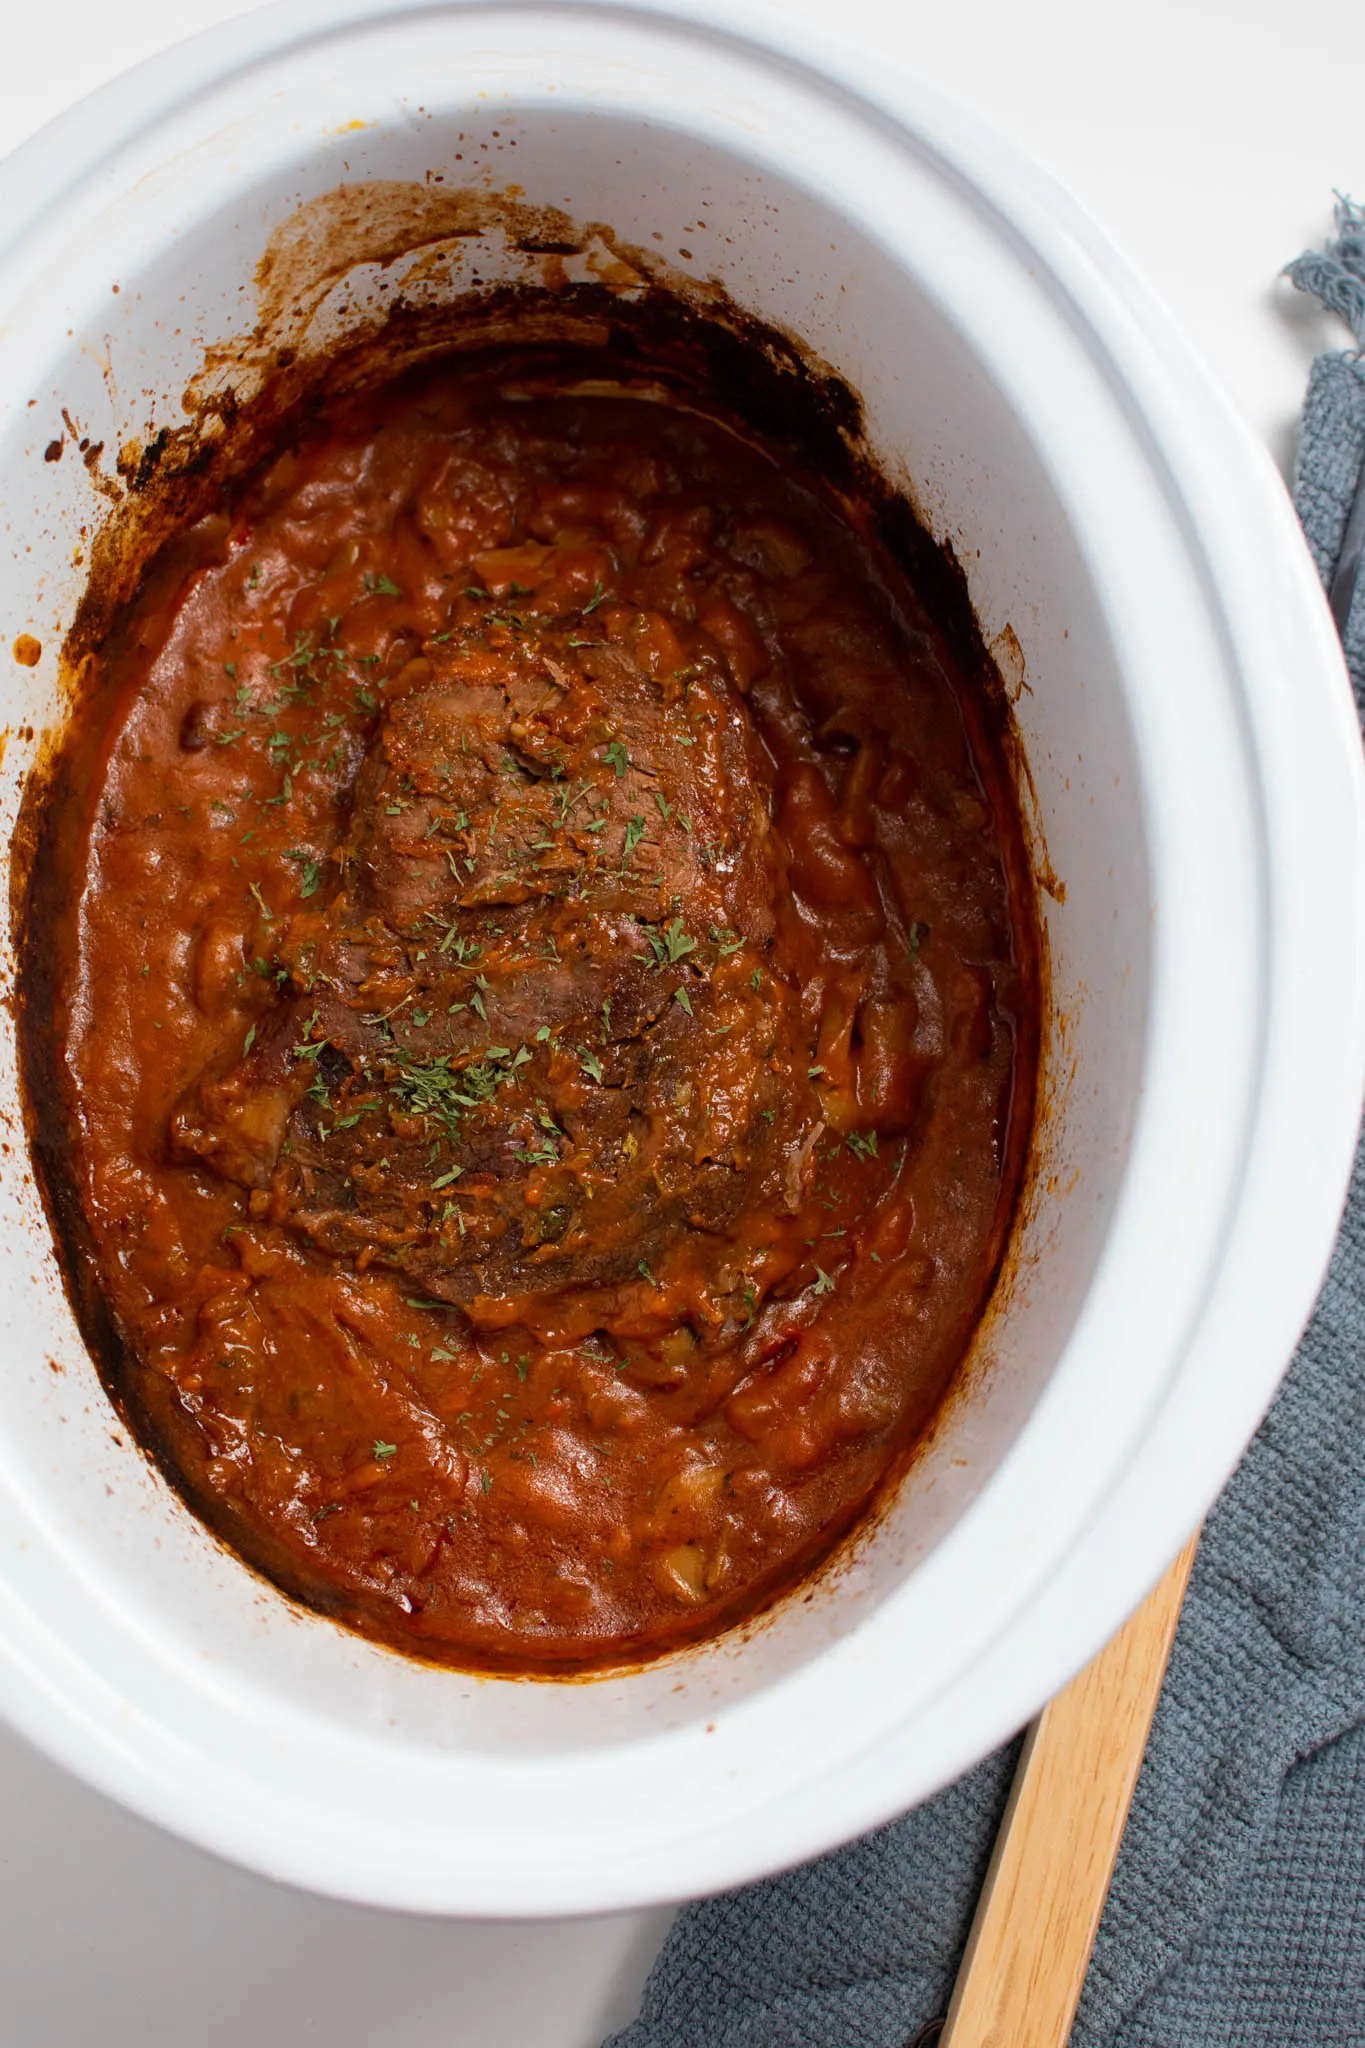 Cooked pot roast and tomato sauce in Crock Pot insert.